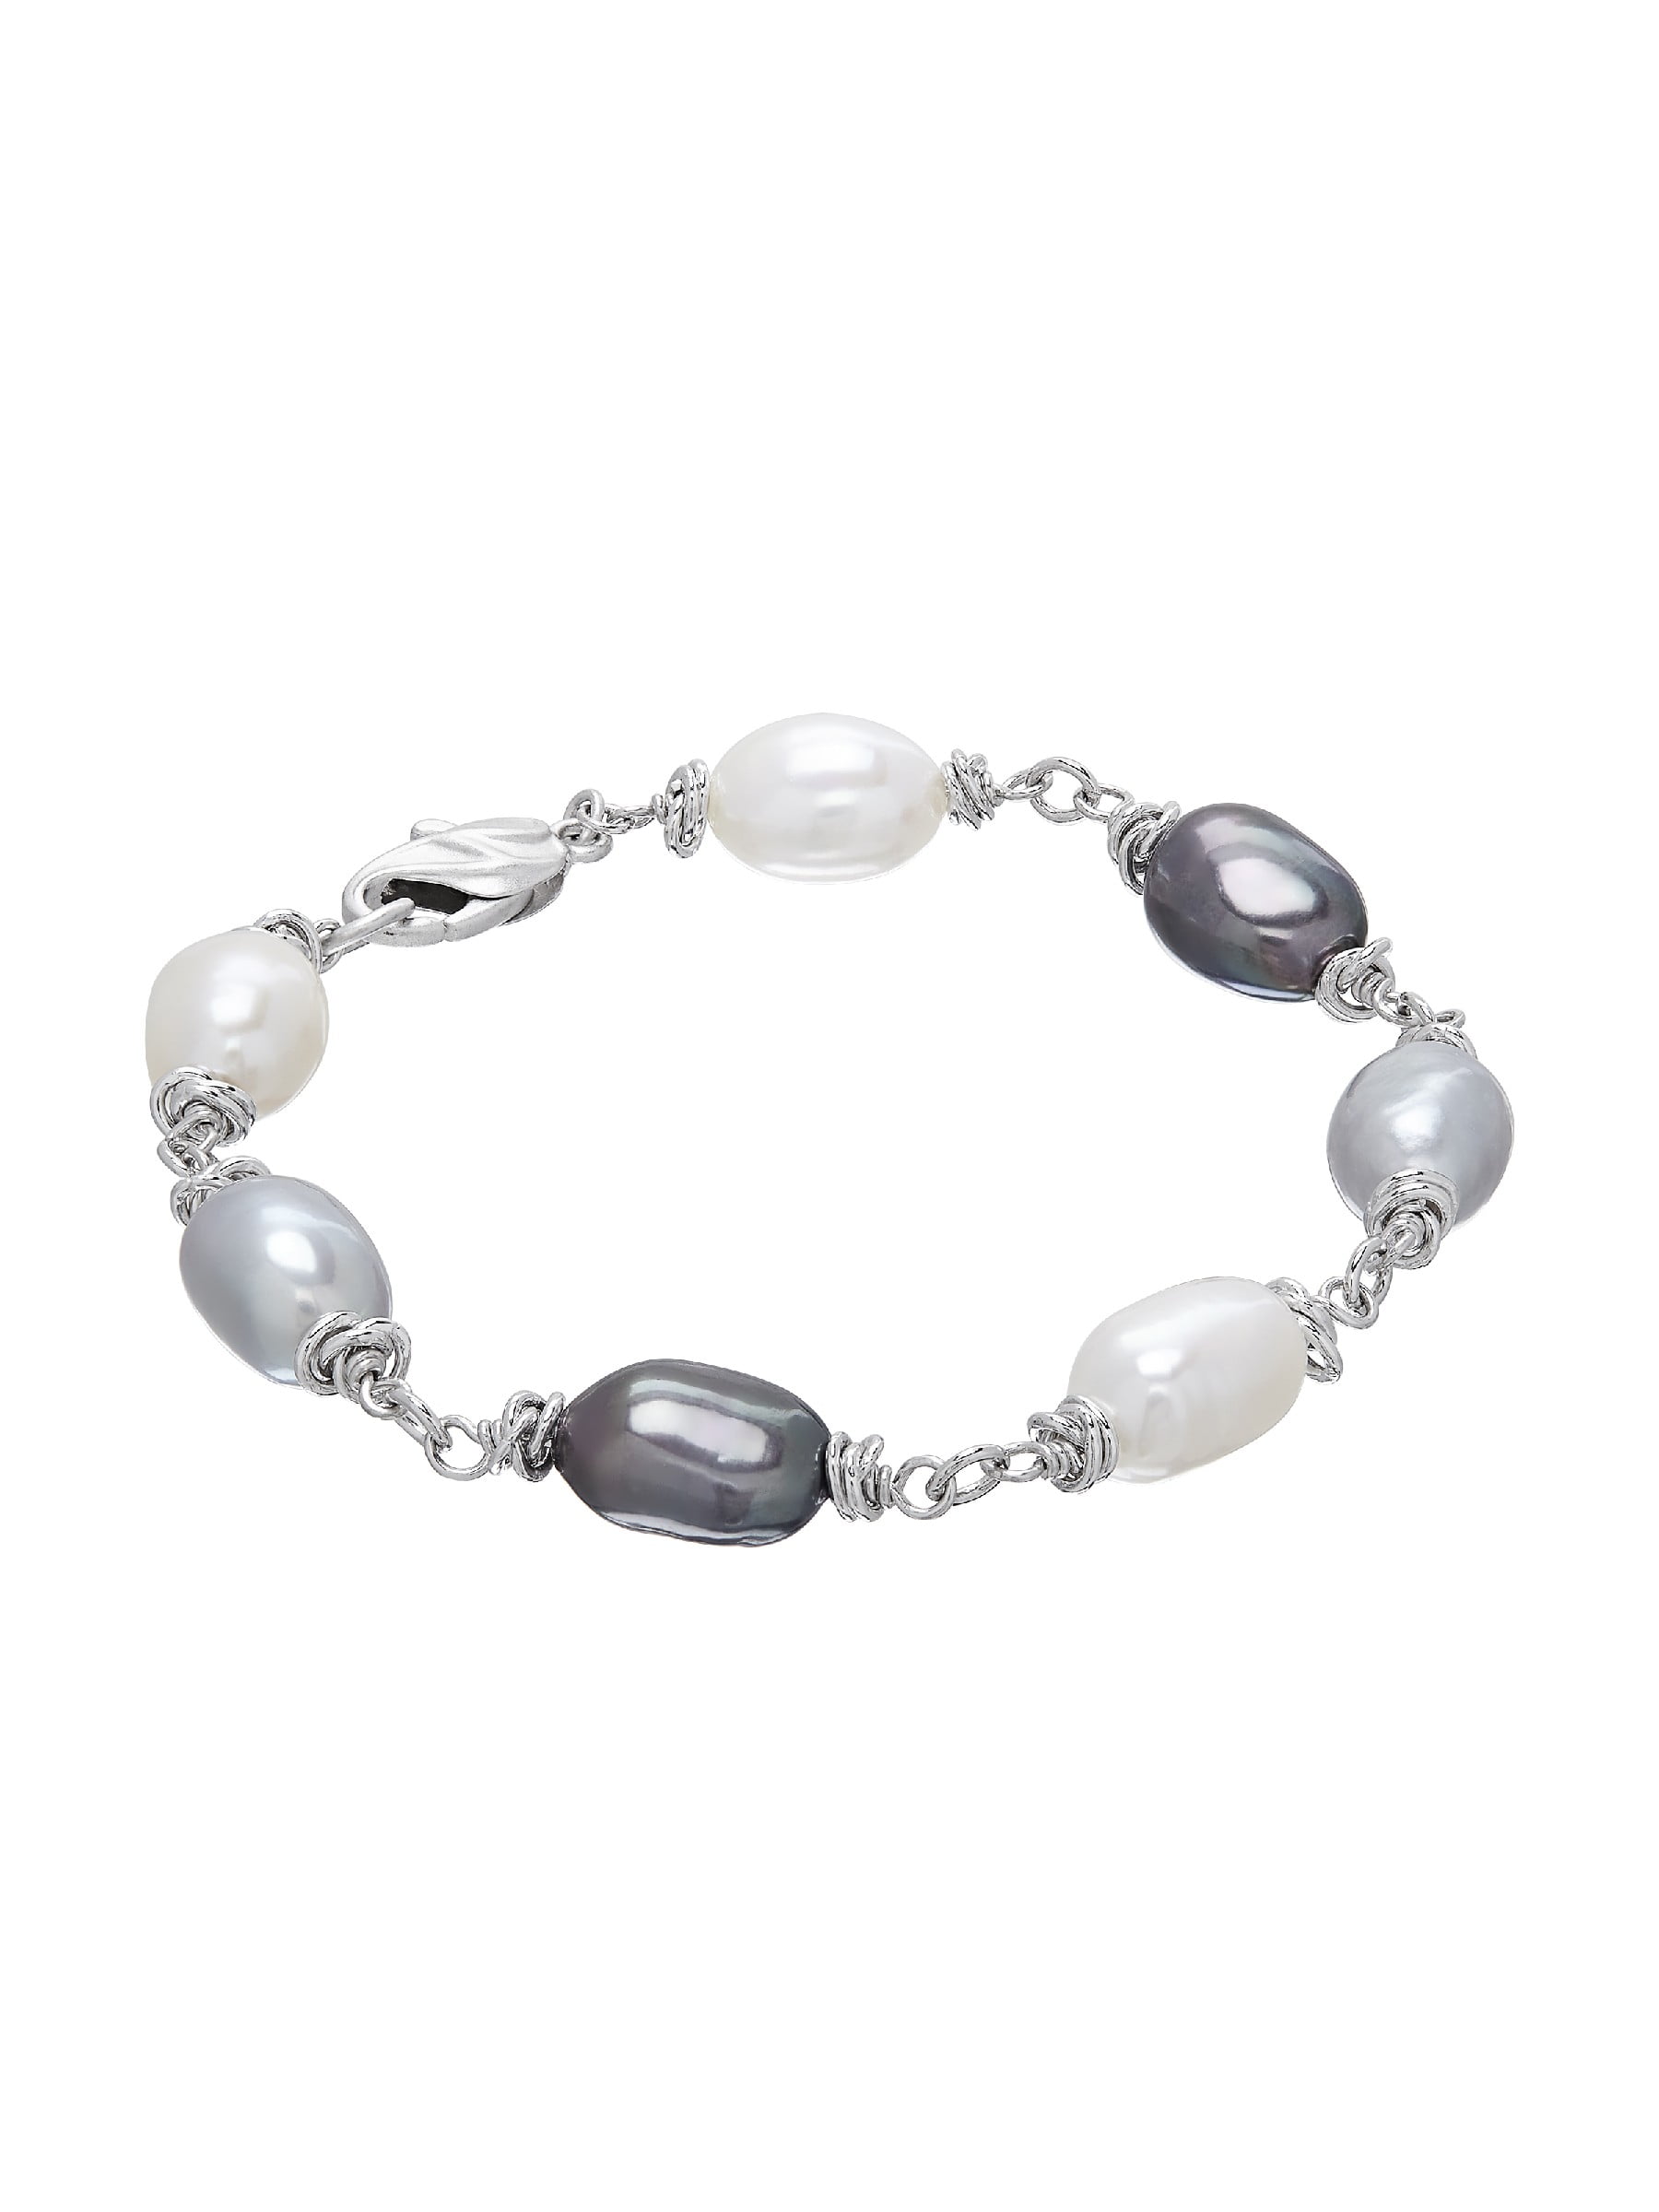 Details about   Simple Bead Bar Bracelet or Anklet Various Colors and Lengths Glass Pearls